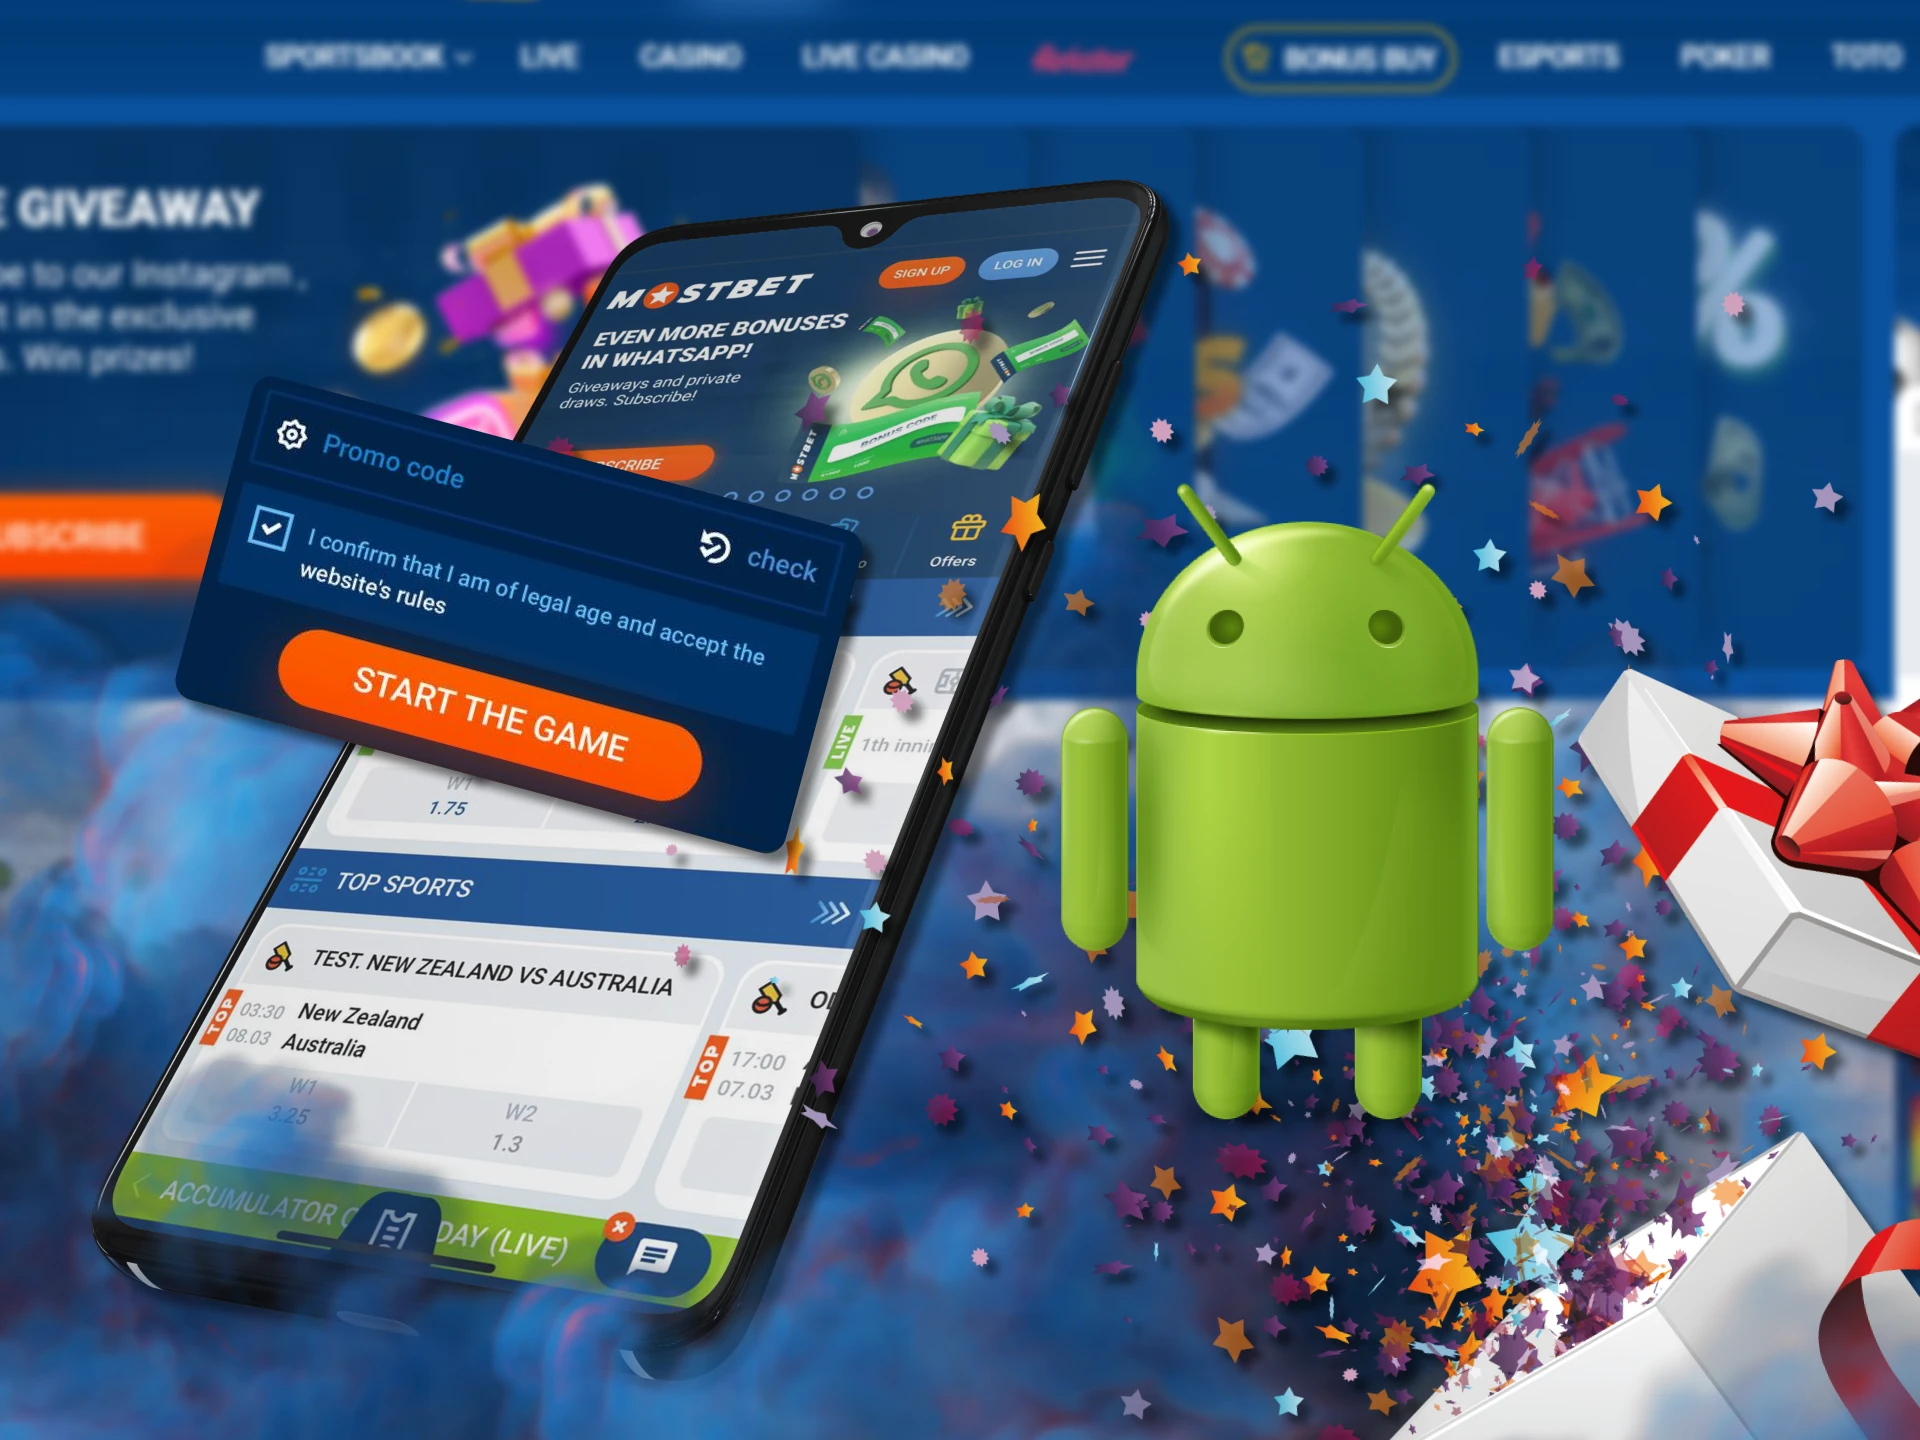 Get a promo code bonus from Mostbet and make your Android device.